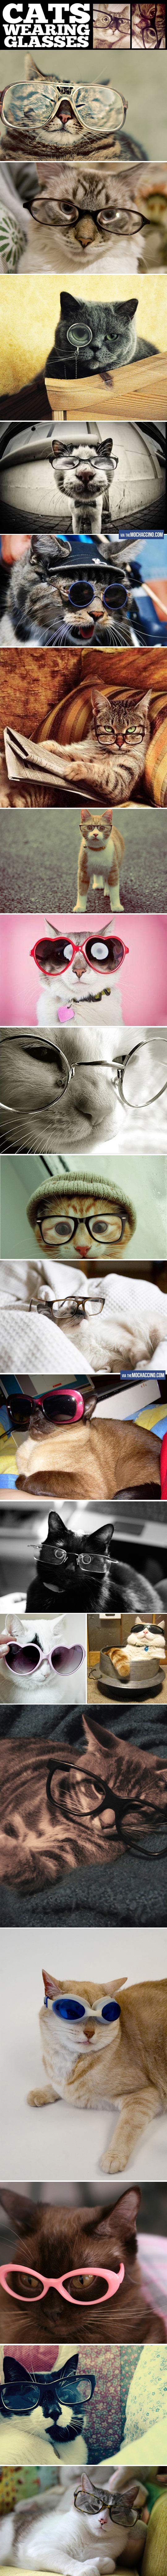 Cats wearing glasses.